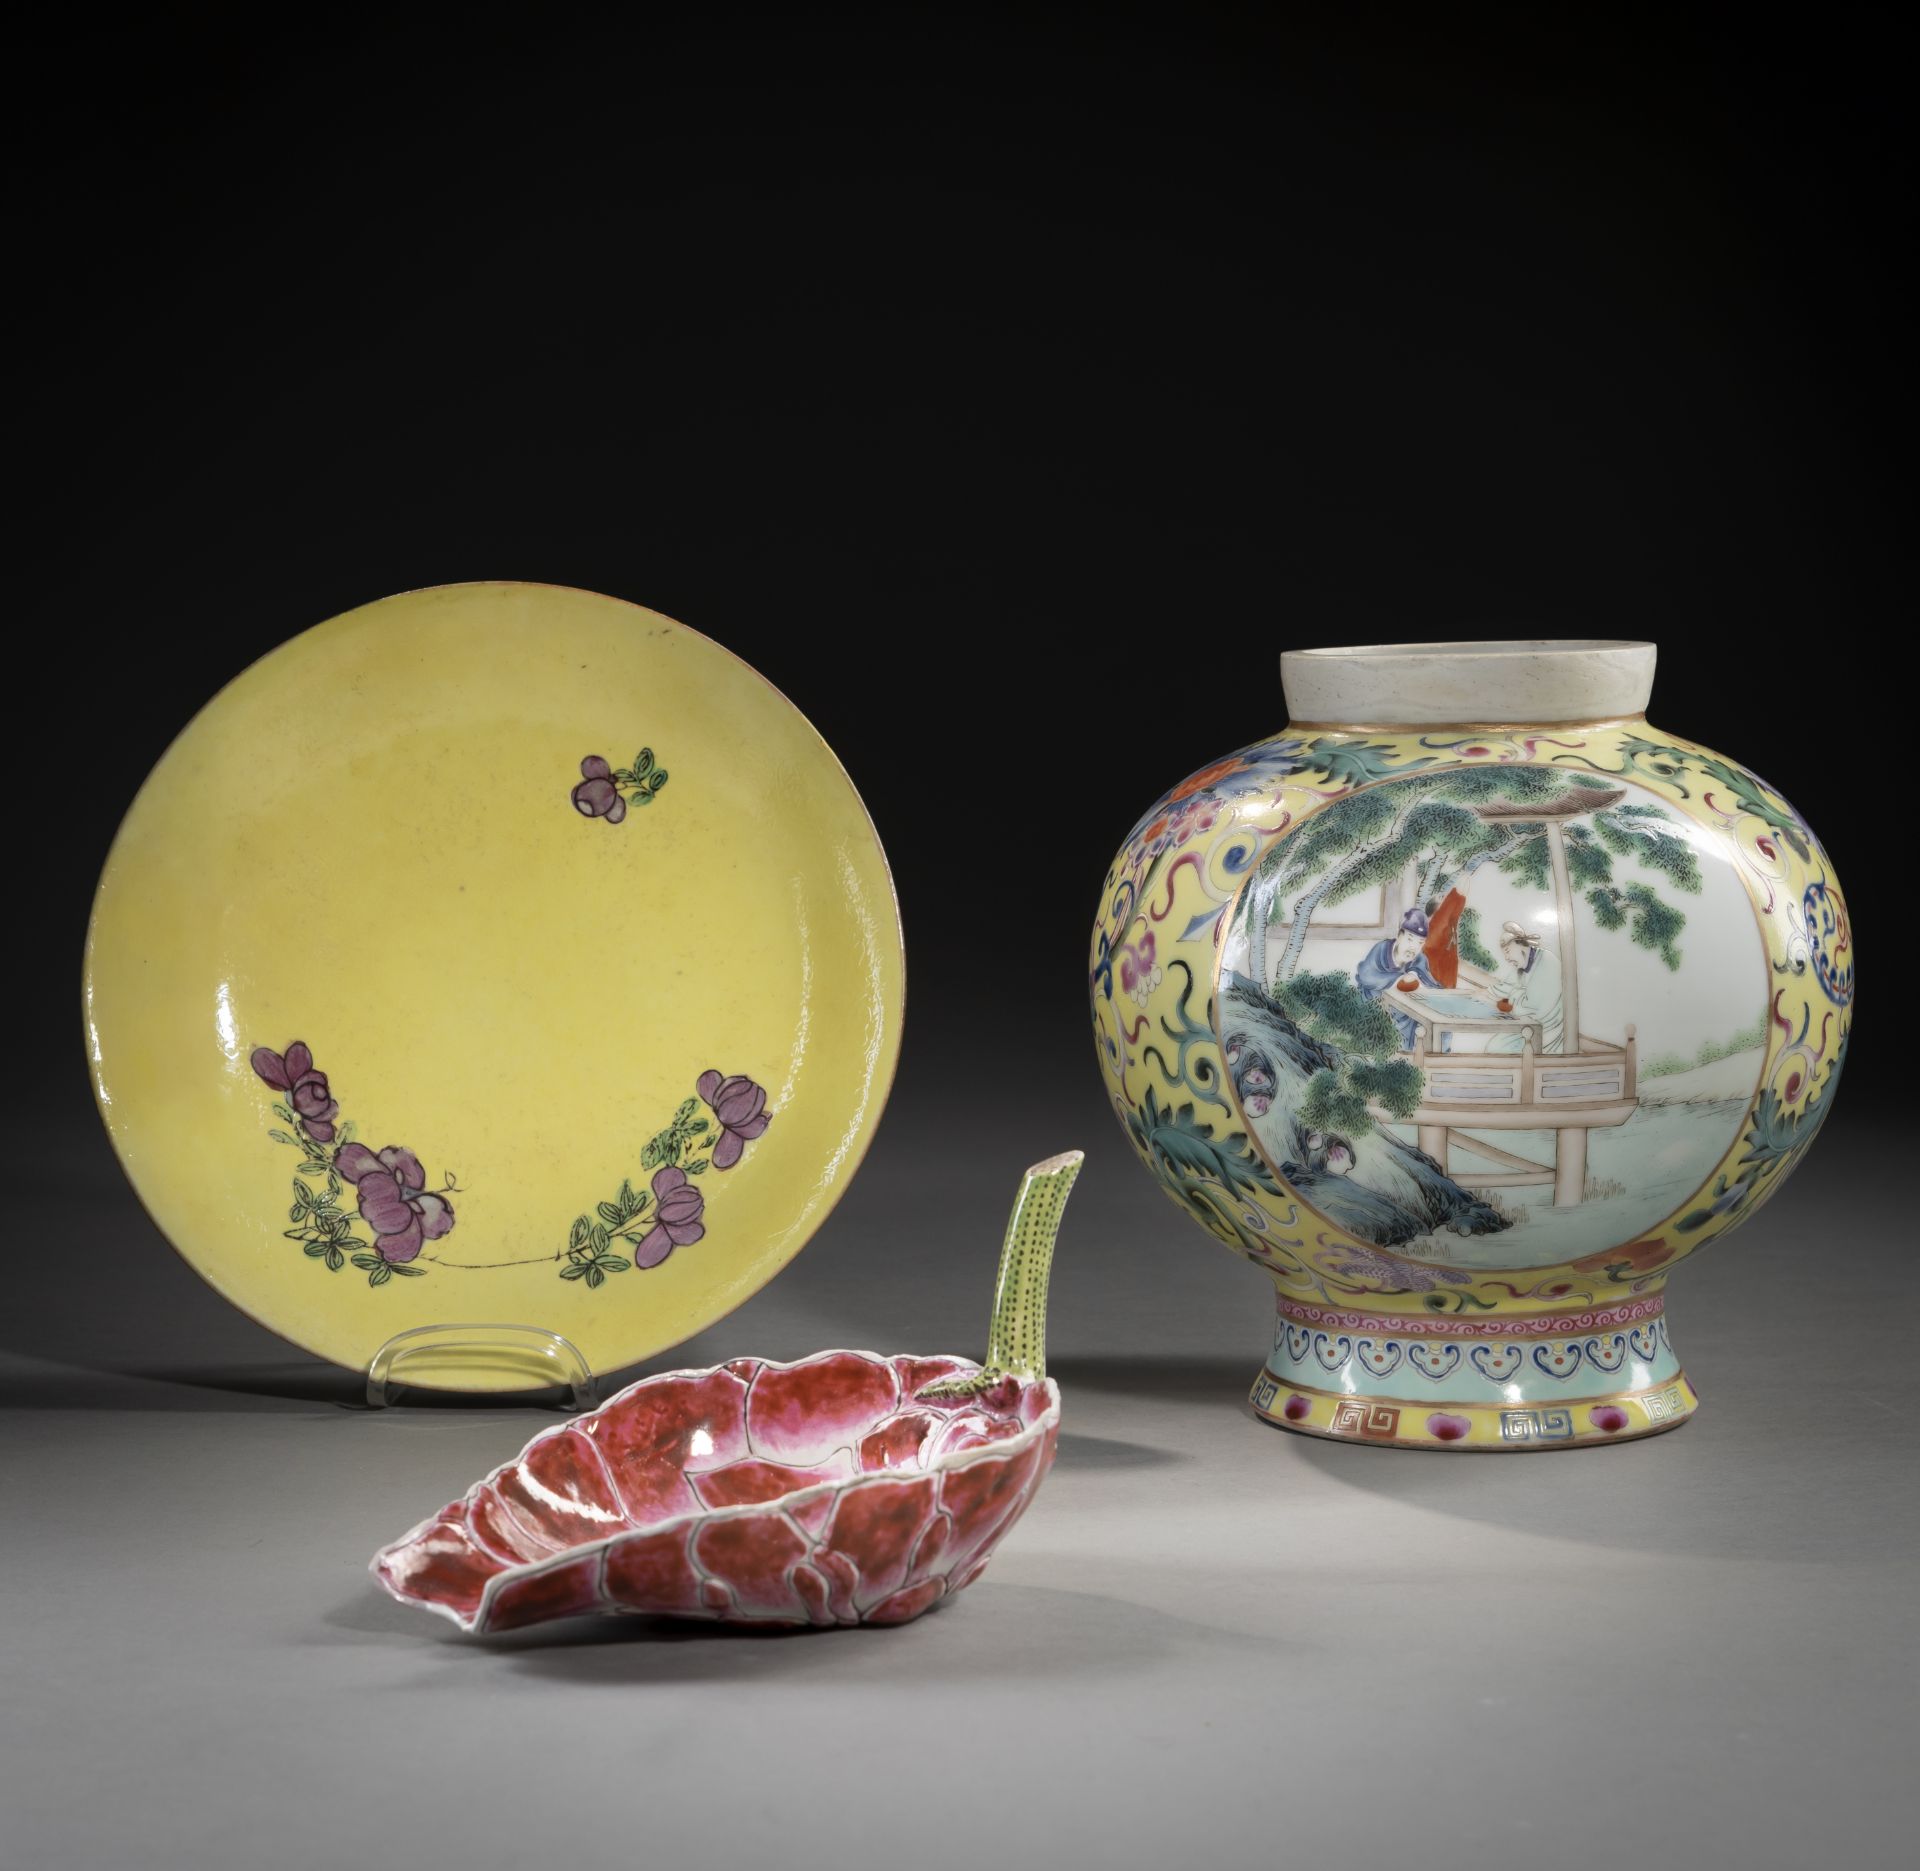 A YELLOW-GROUND 'FAMILLE ROSE' PORCELAIN VASE, A YELLOW DISH, AND A LOTUS-SHAPED LIBATION VESSEL